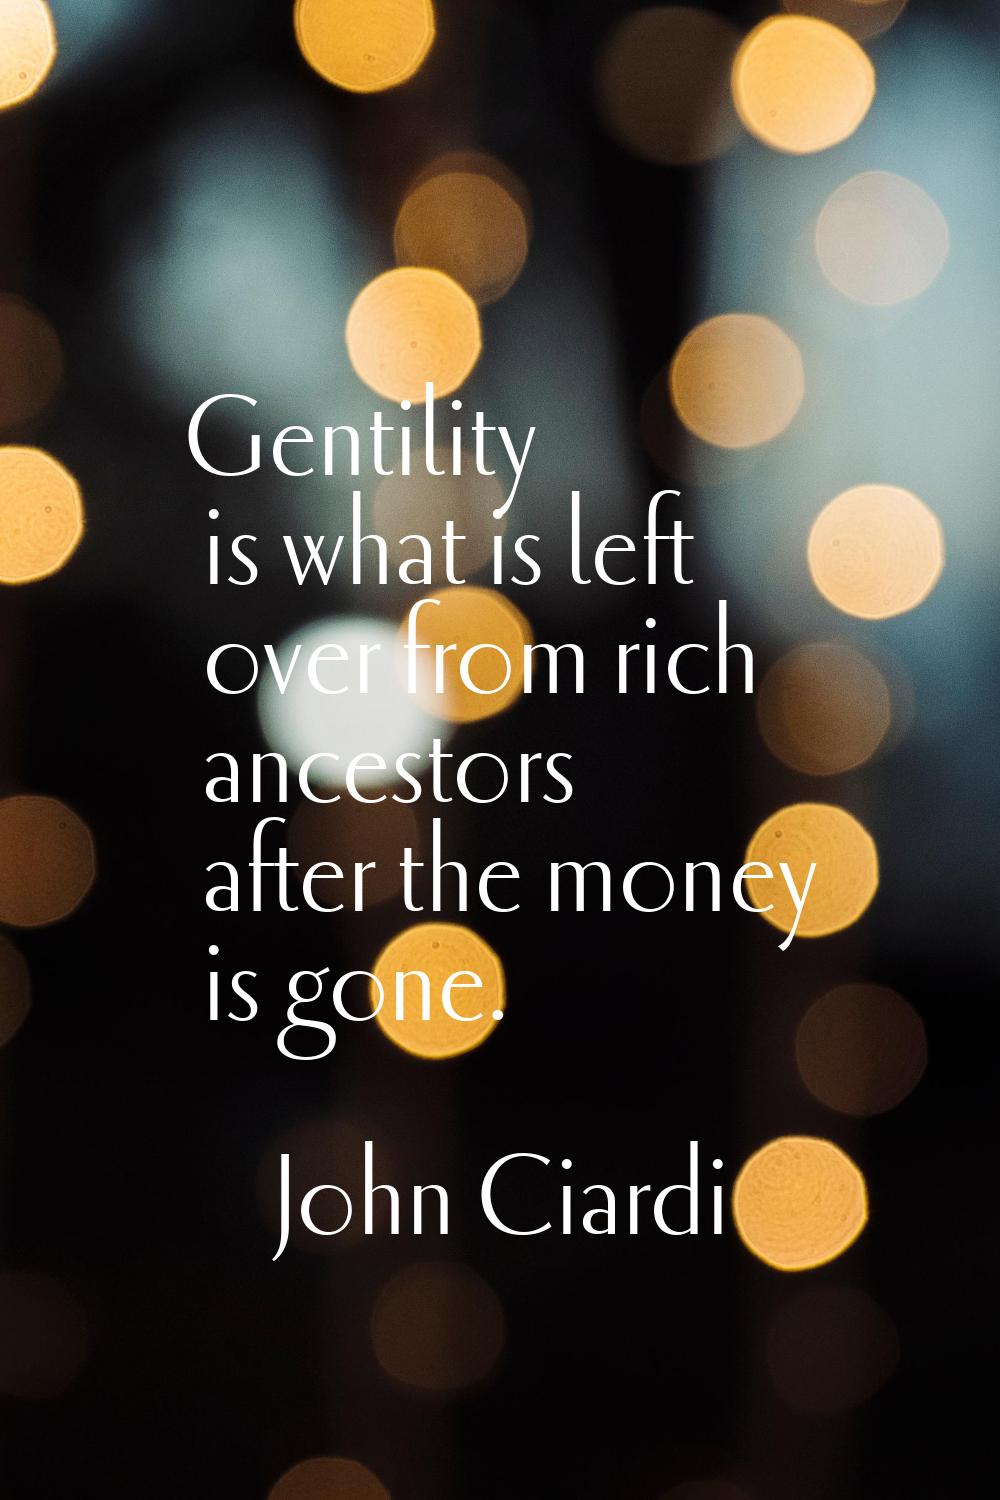 Gentility is what is left over from rich ancestors after the money is gone.